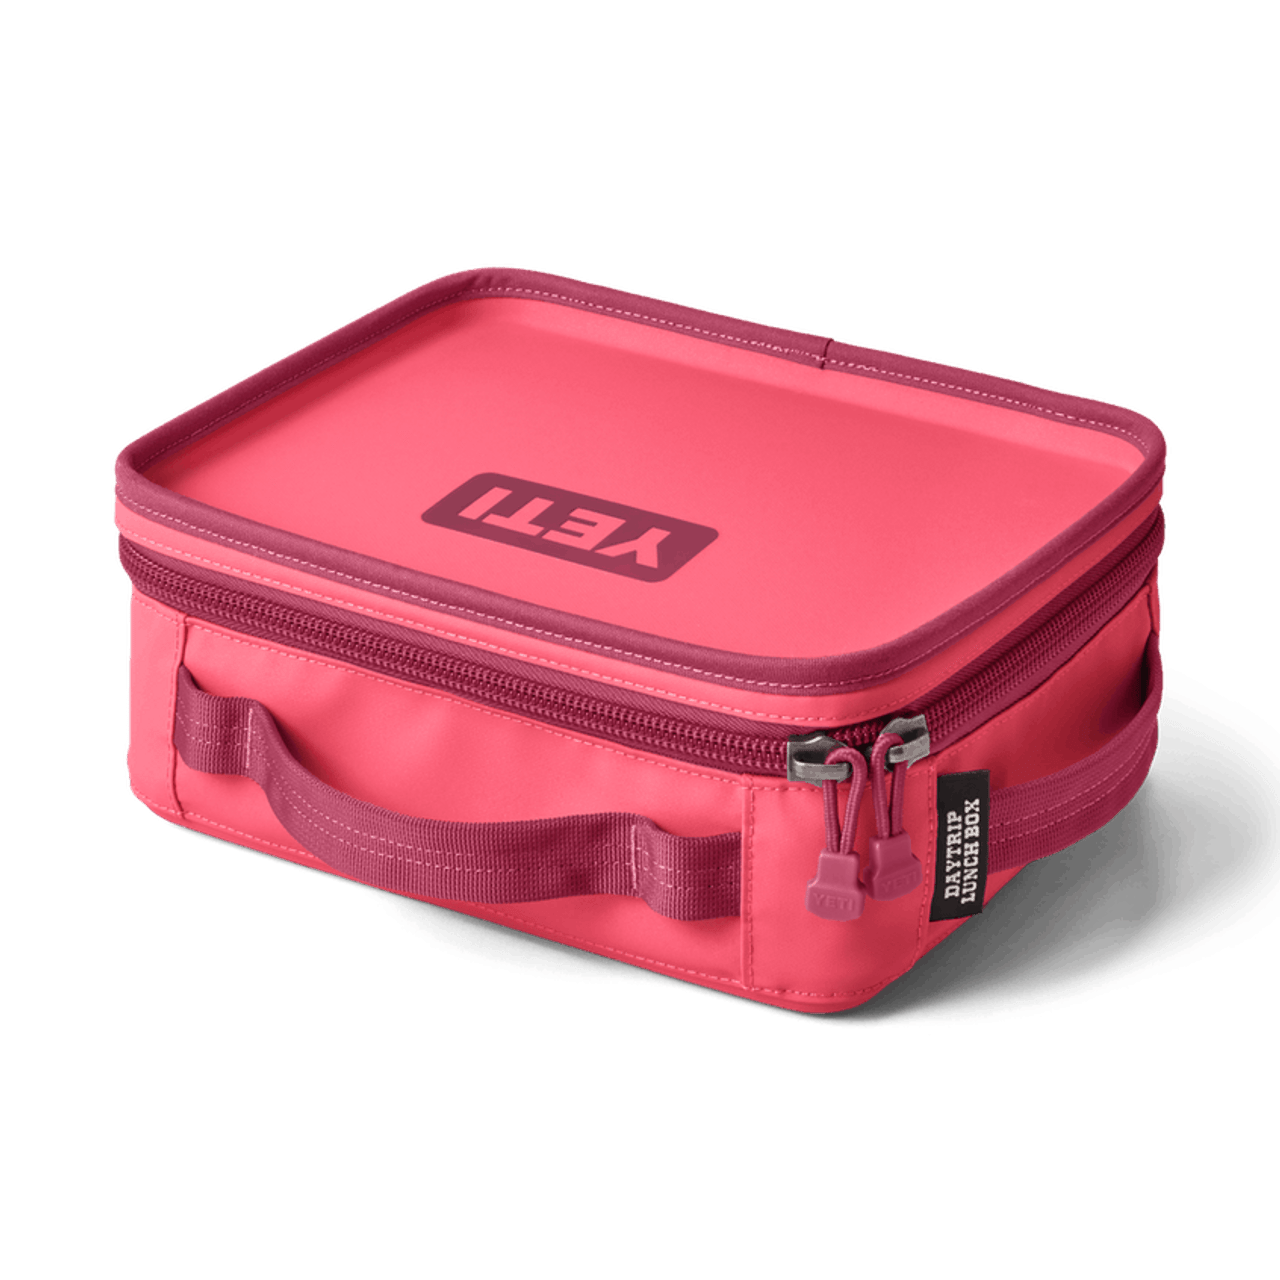 https://cdn11.bigcommerce.com/s-mdle1ql08i/images/stencil/1280x1280/products/7282/10812/yeti-lunch-box-bimini-pink-5__06151.1651629923.png?c=2?imbypass=on